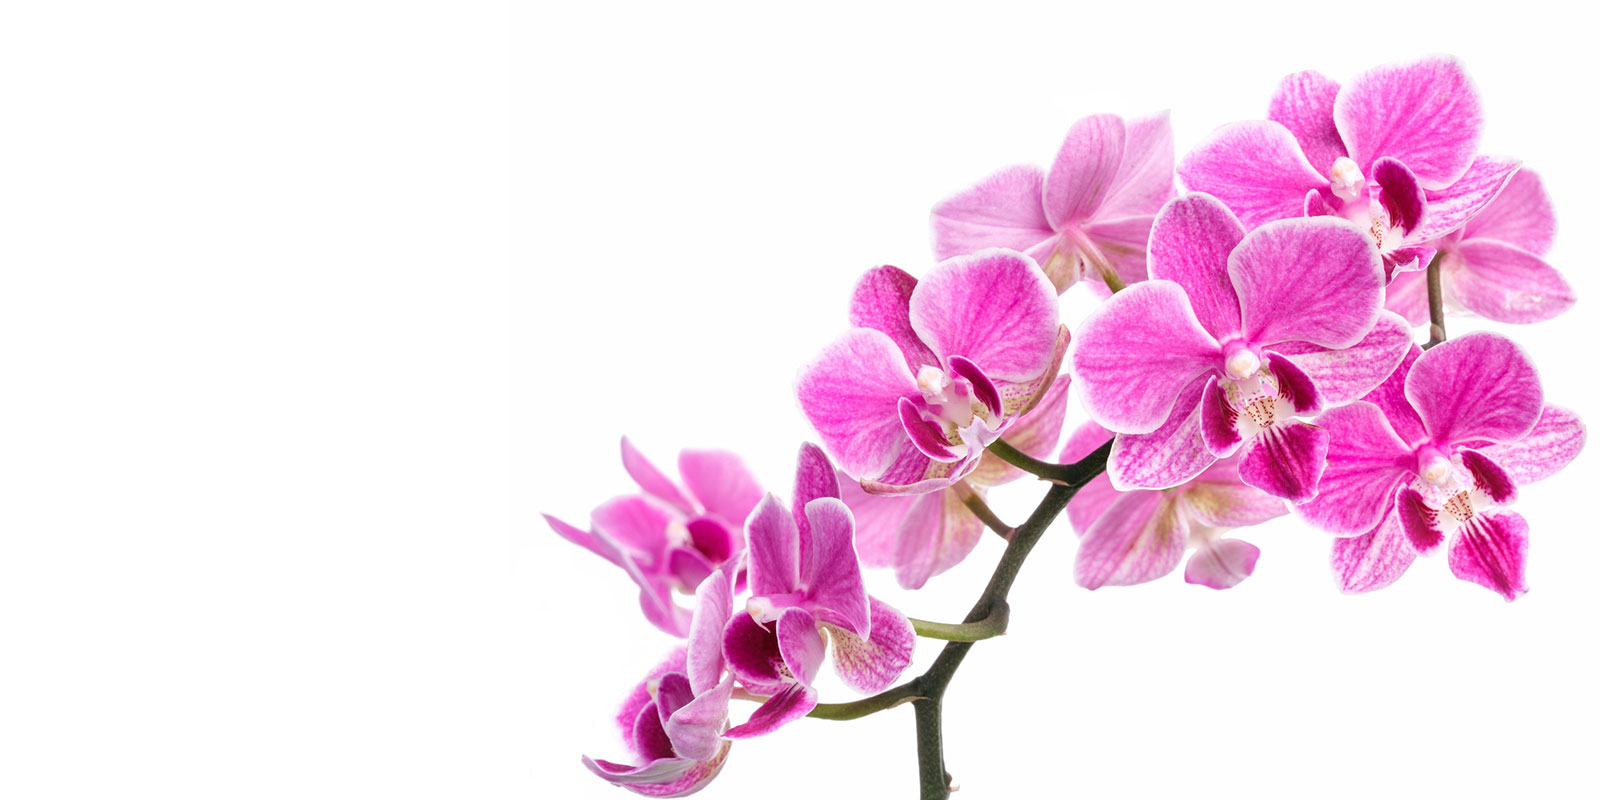 Stock photo of pink orchids on a white background.